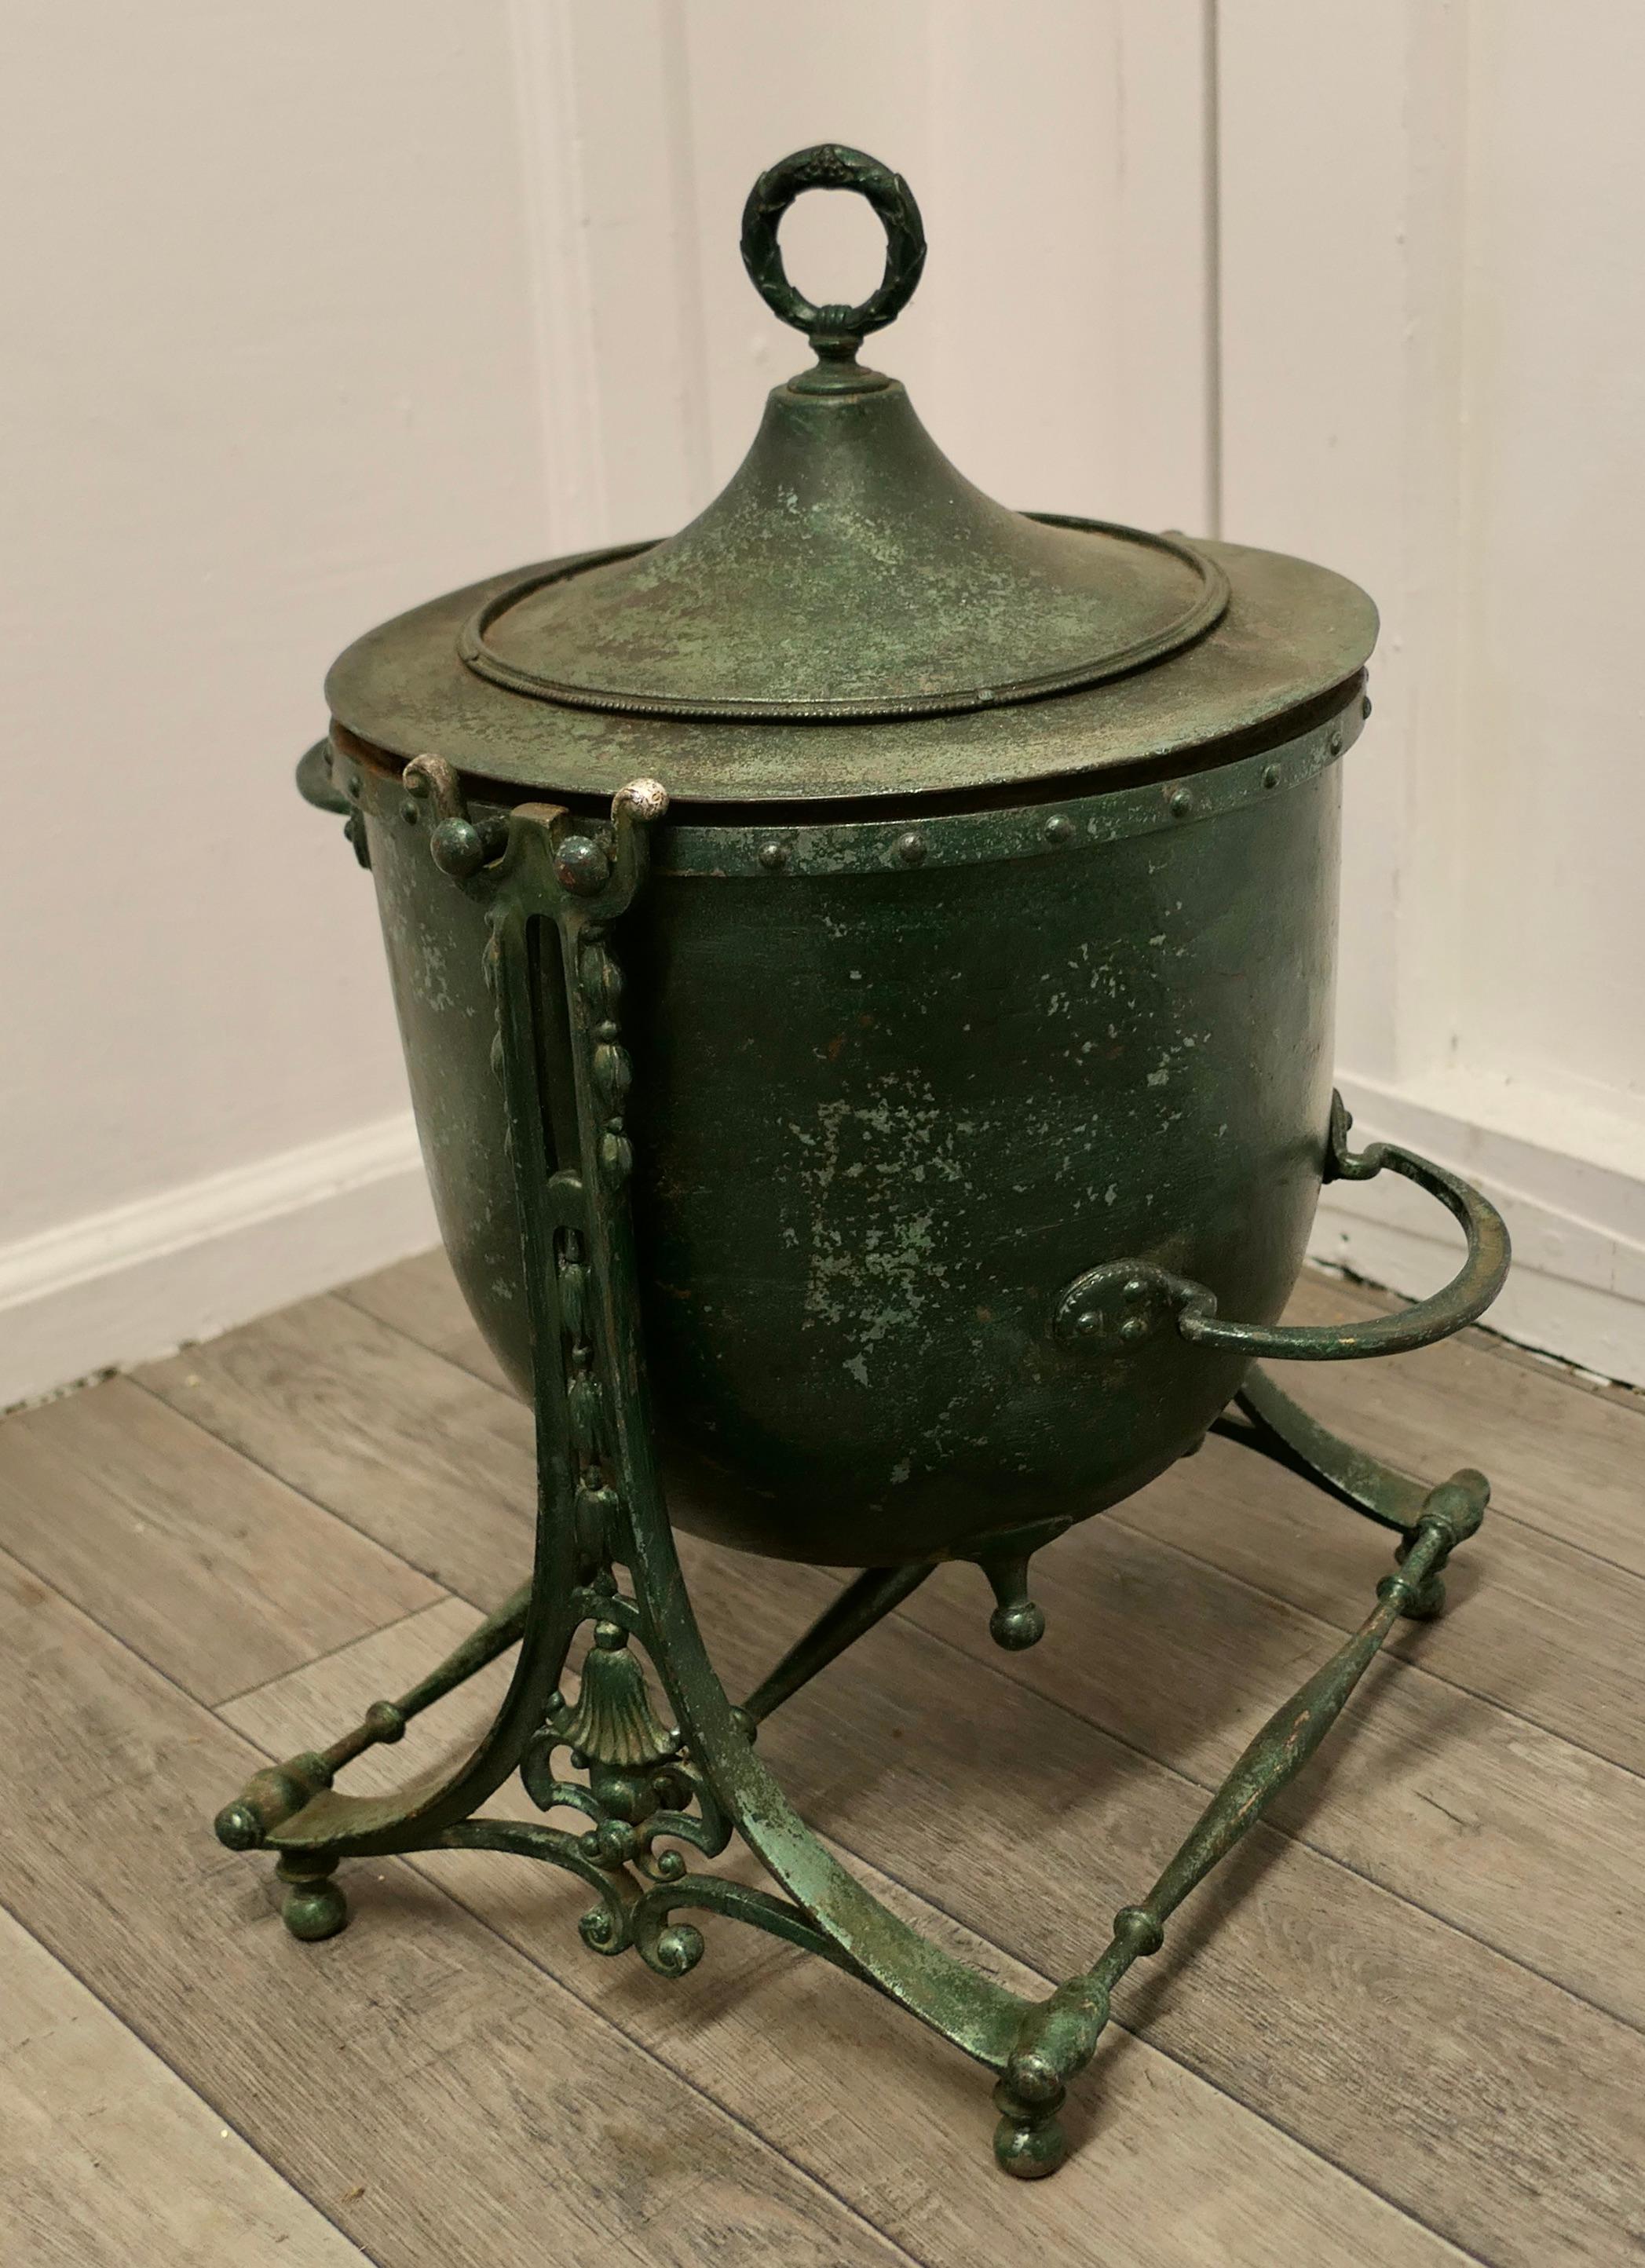 Large 19th century iron pot, cauldron on stand

This is an interesting Pot, it is made in cast iron, it has a lid and a stand on which it can be tilted.
The pot has green verdigris patination 
It is a heavy sound pot with the usual expected